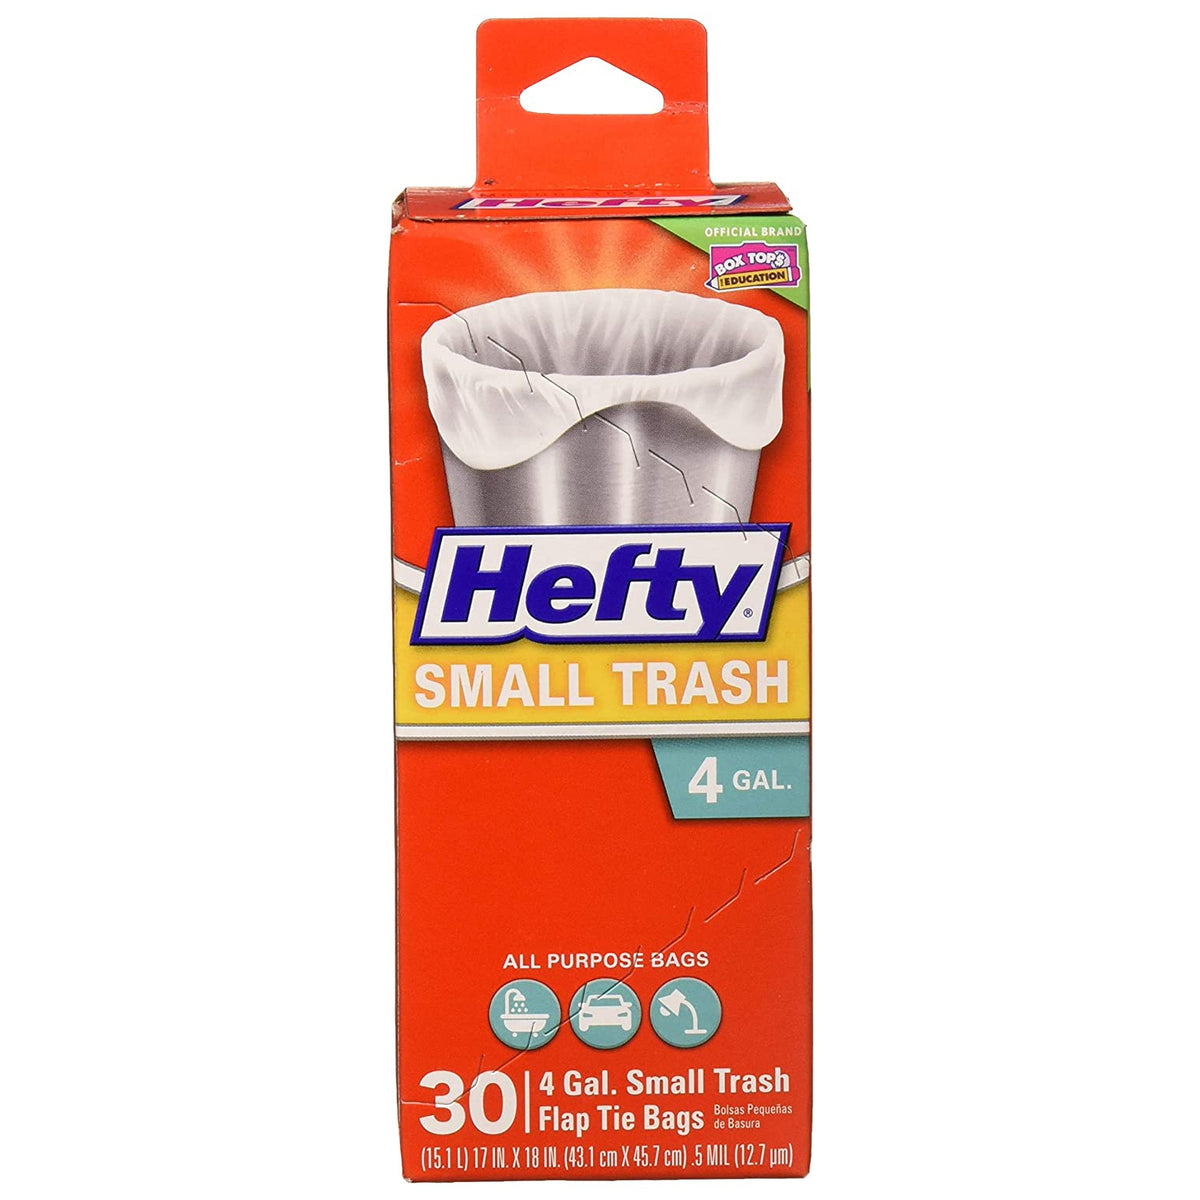 Hefty E20119 Unscented Small Trash Bag w/Flap Tie Closure, 4-Gal, 30-Count